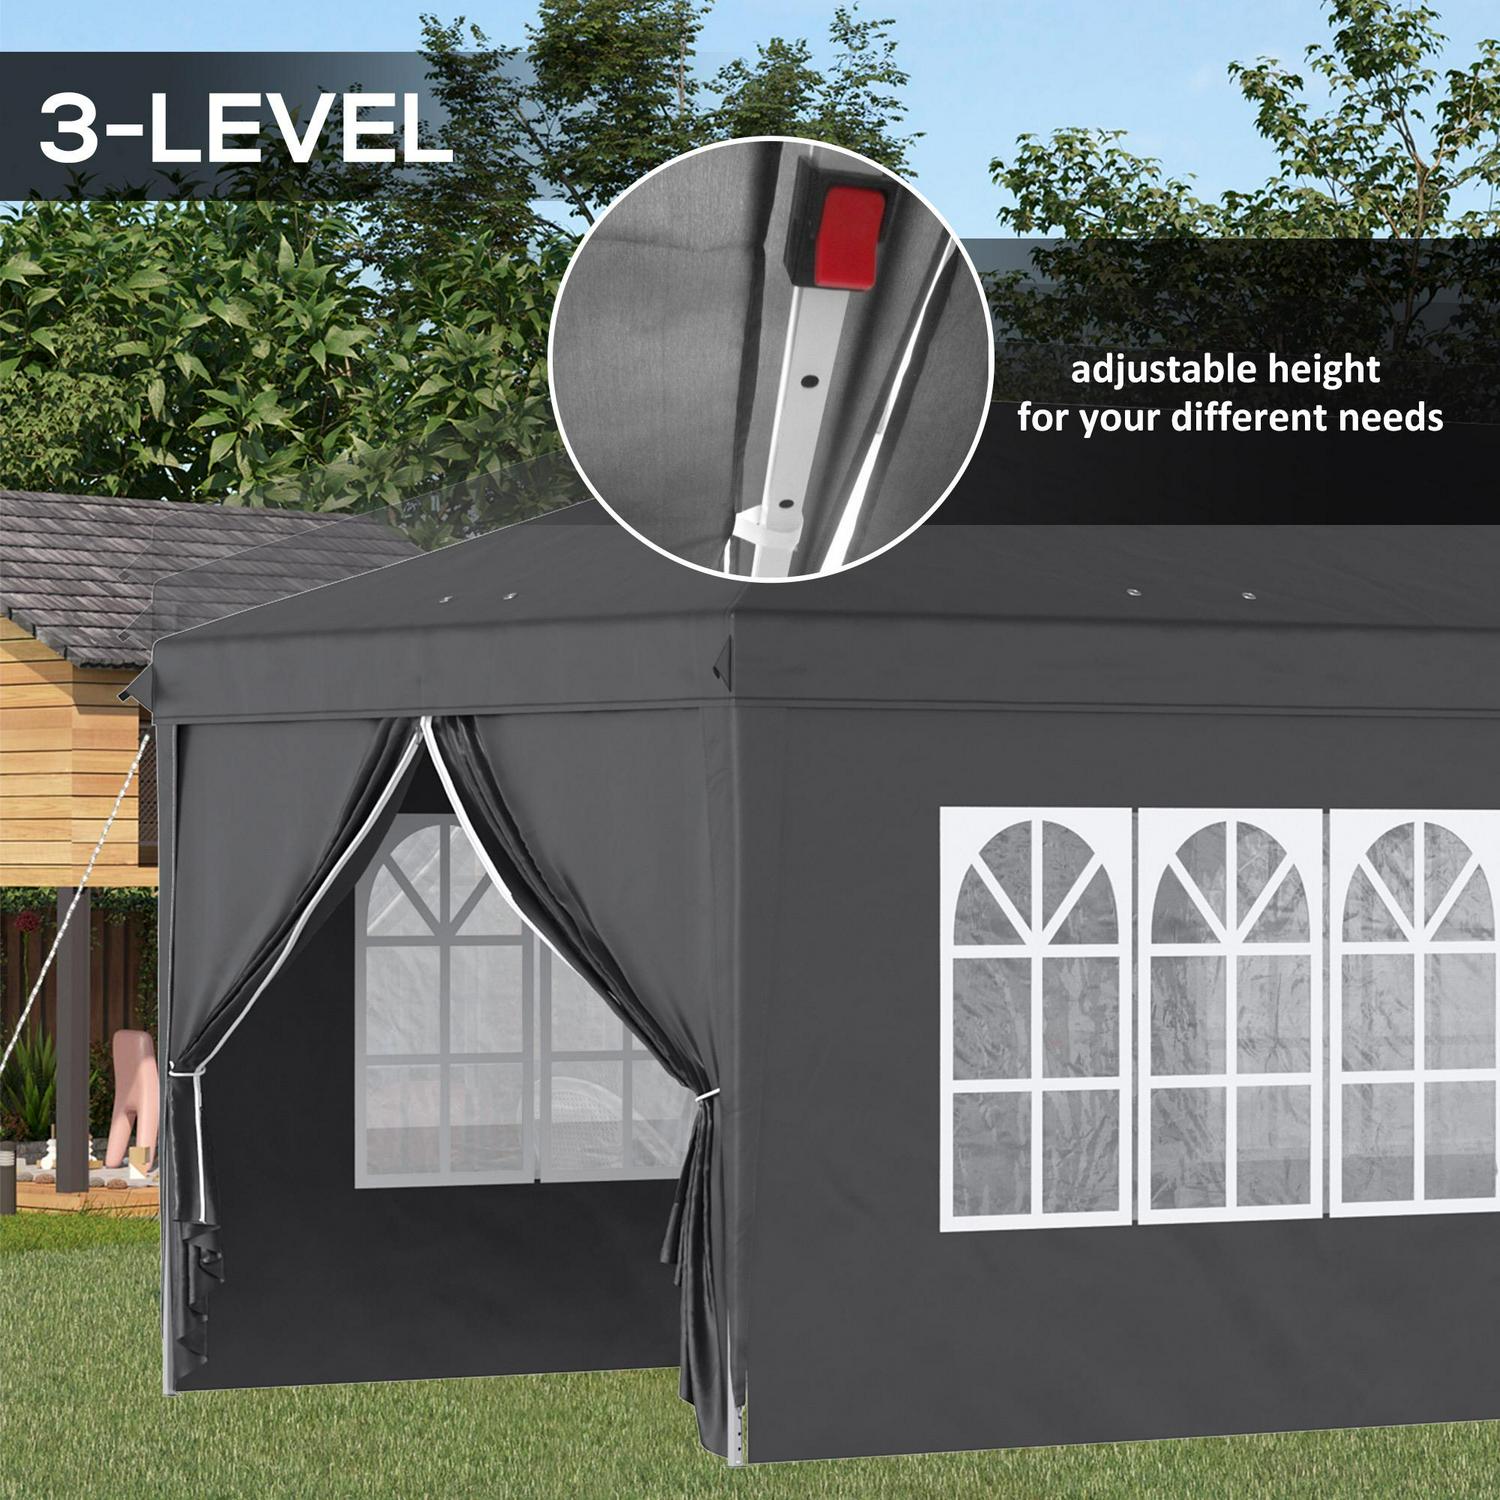 Pop Up Gazebo With Sides And Windows- Black